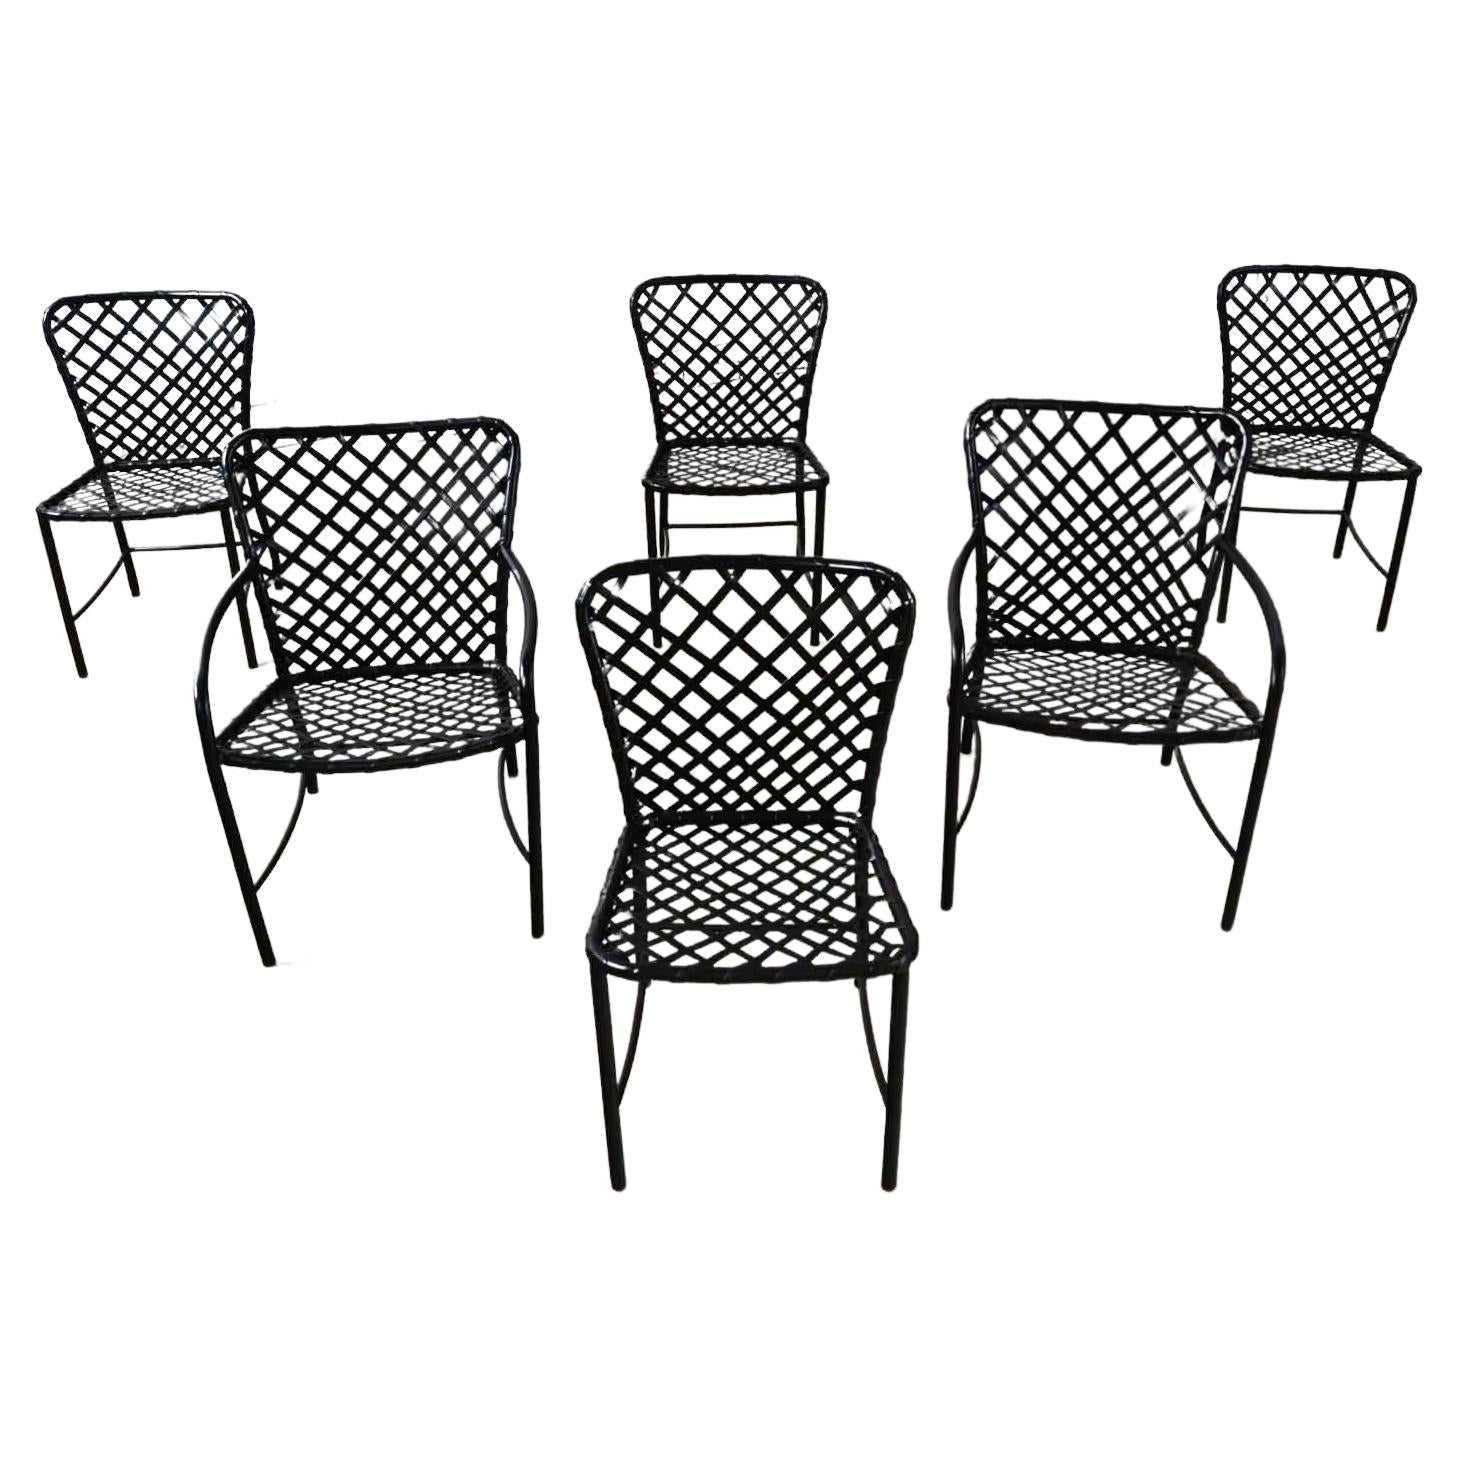 6 MCM Brown Jordan Tamiami Outdoor Dining Chairs 4 Side & 2 Arm by Hall Bradley For Sale